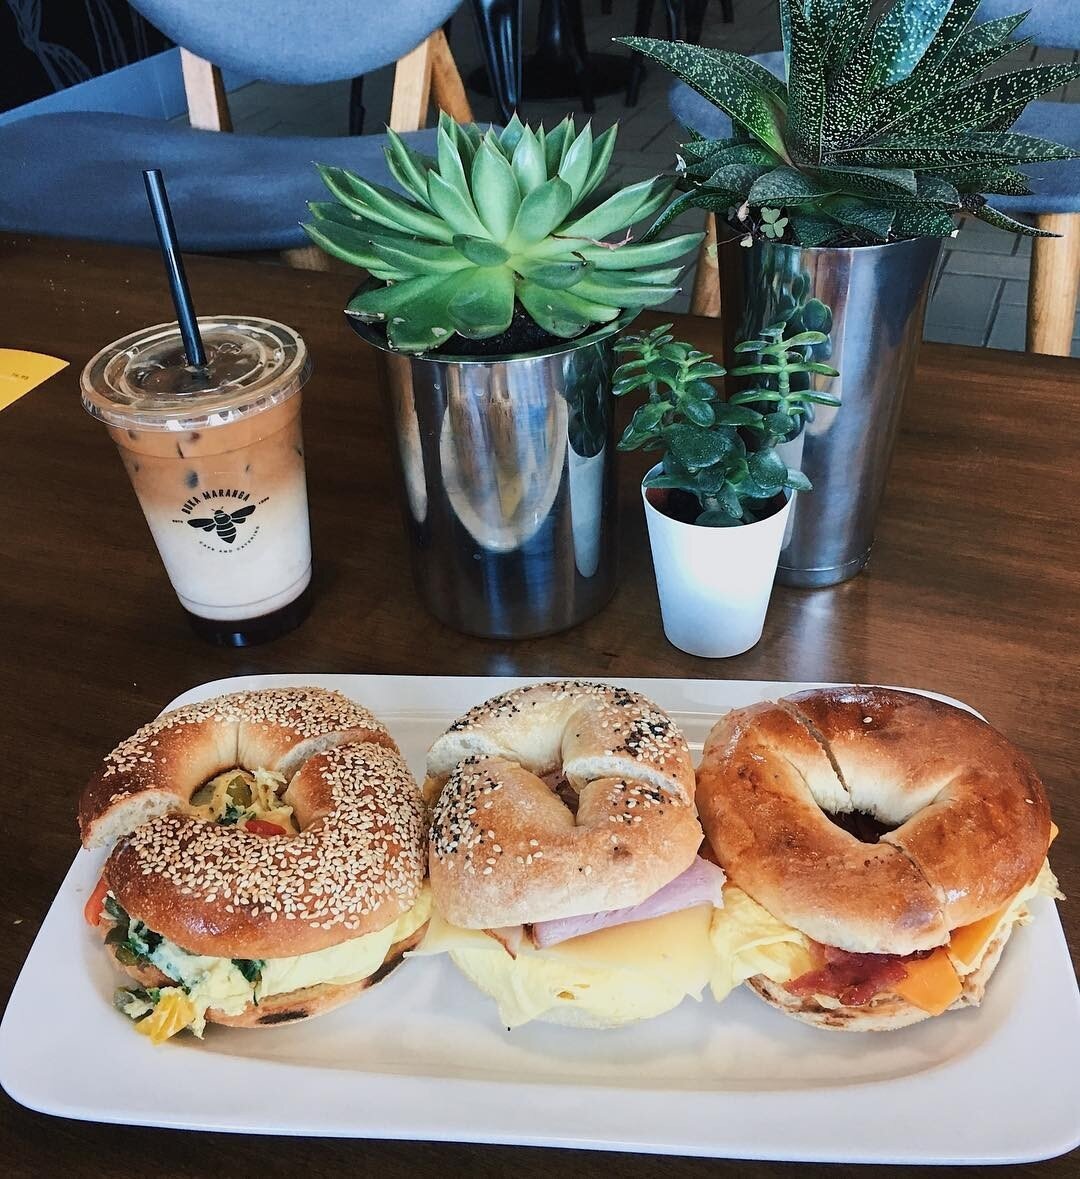 TRIPLE BAGELS 🥯🥯🥯 our Buka Bagel sandwiches are loaded with tons of flavor. 🥬🍳🥑 Nourish yourself and order delivery through our website today&mdash;link in bio.⠀⠀⠀⠀⠀⠀⠀⠀⠀
⠀⠀⠀⠀⠀⠀⠀⠀⠀
How do you like your bagel sandwiches?⠀⠀⠀⠀⠀⠀⠀⠀⠀
⠀⠀⠀⠀⠀⠀⠀⠀⠀
📸: @b